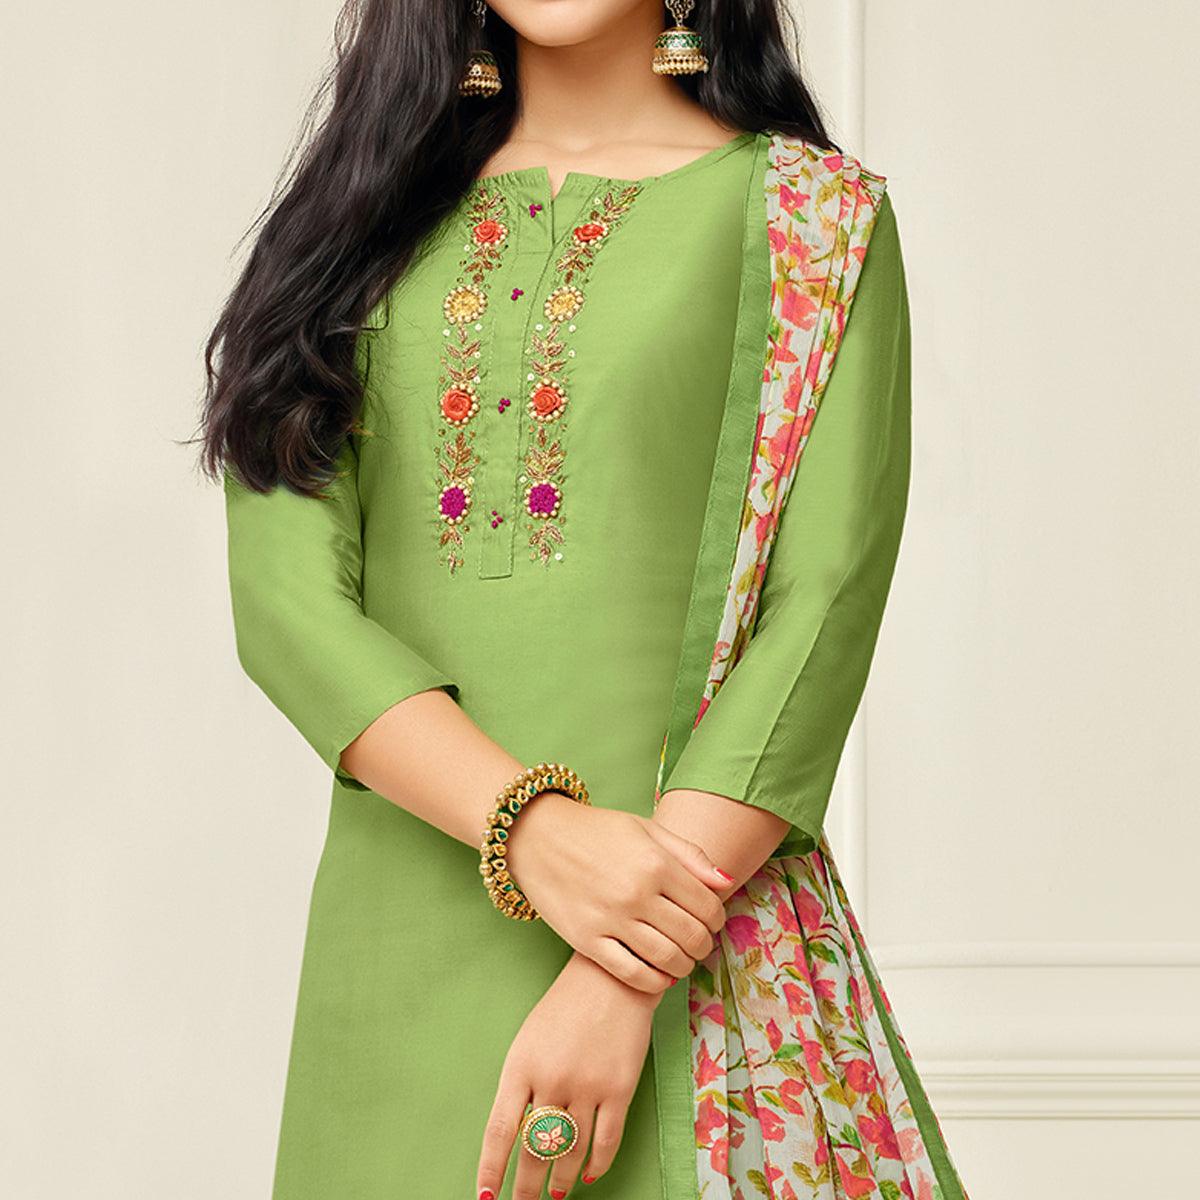 Captivating Pista Green Colored Casual Wear Embroidered Chanderi Dress Material - Peachmode